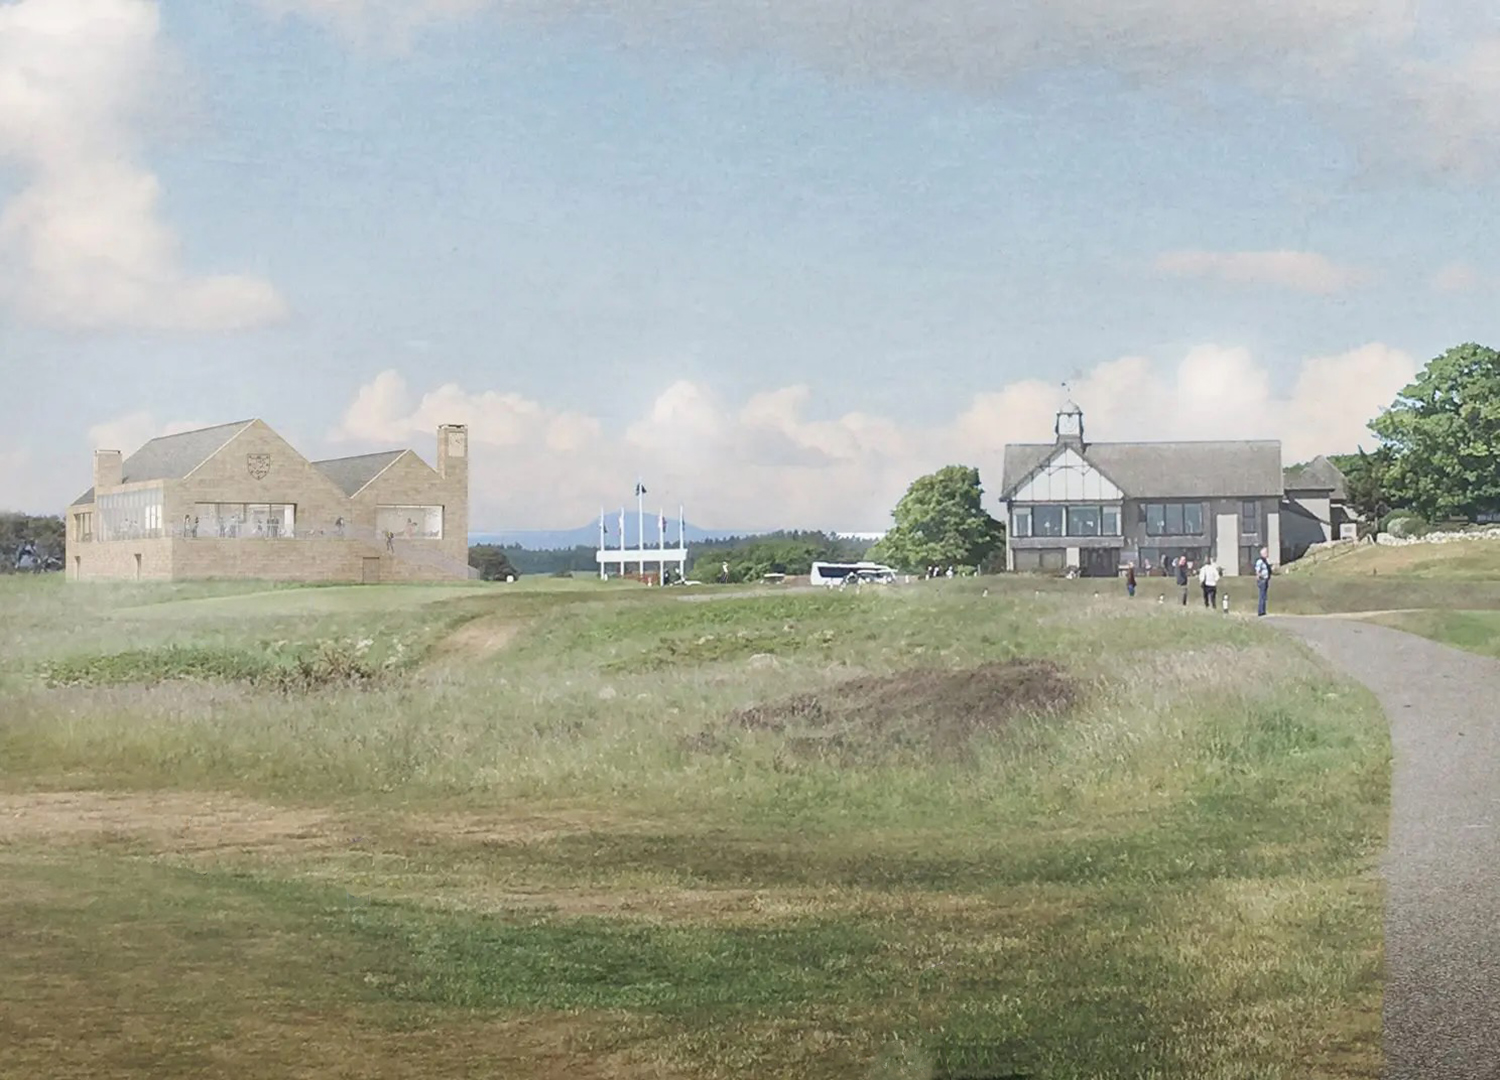 Morrison Construction to commence Royal Dornoch's £13.9m clubhouse project